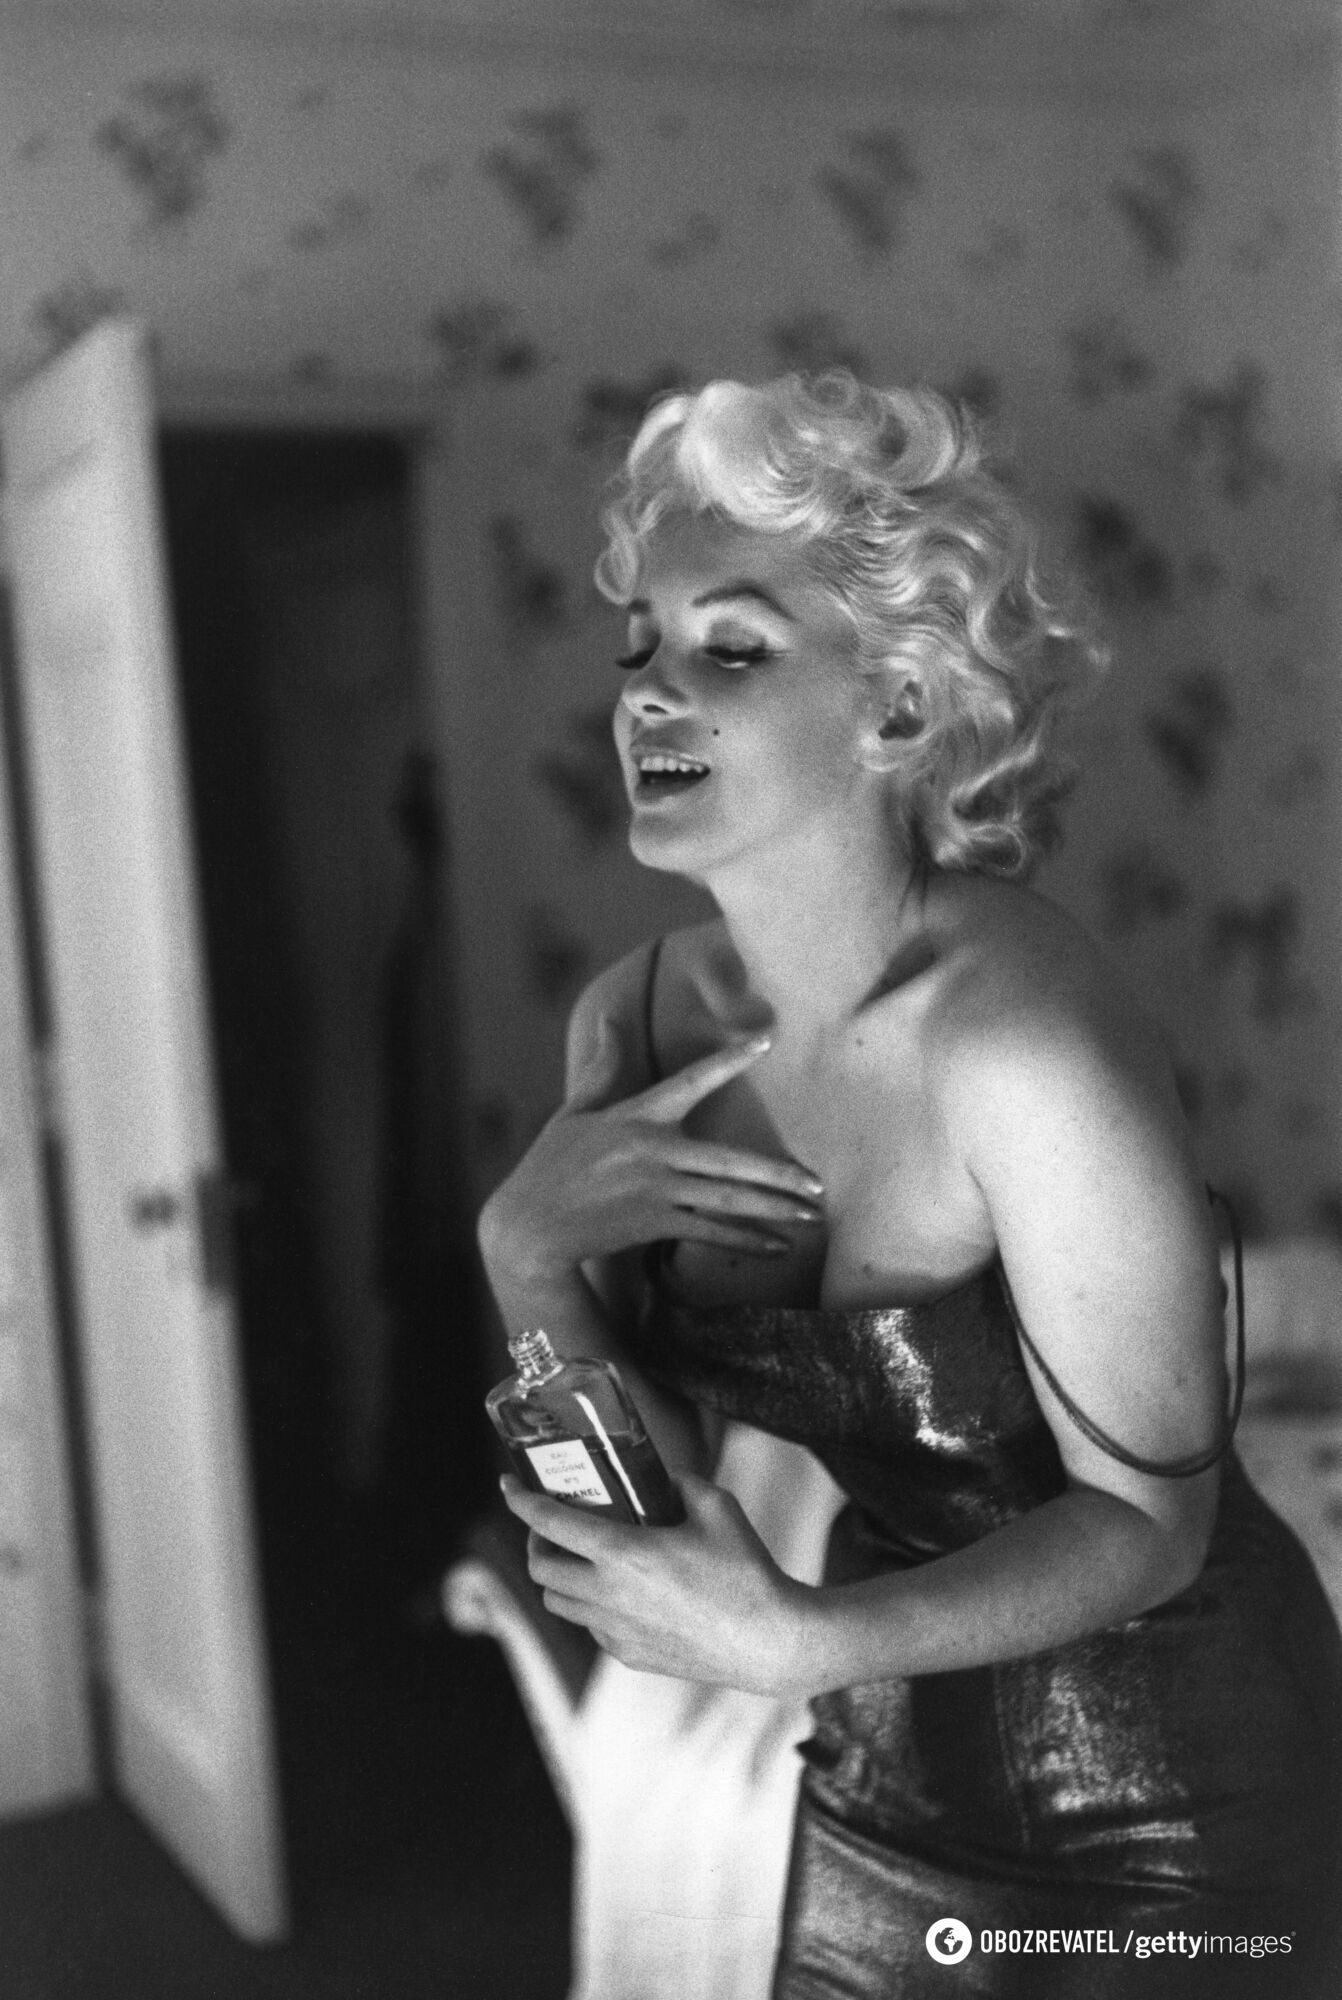 From Chanel No. 5 to Givenchy: 5 exquisite perfumes worn by Marilyn Monroe, Audrey Hepburn and other beauty icons of the 20th century